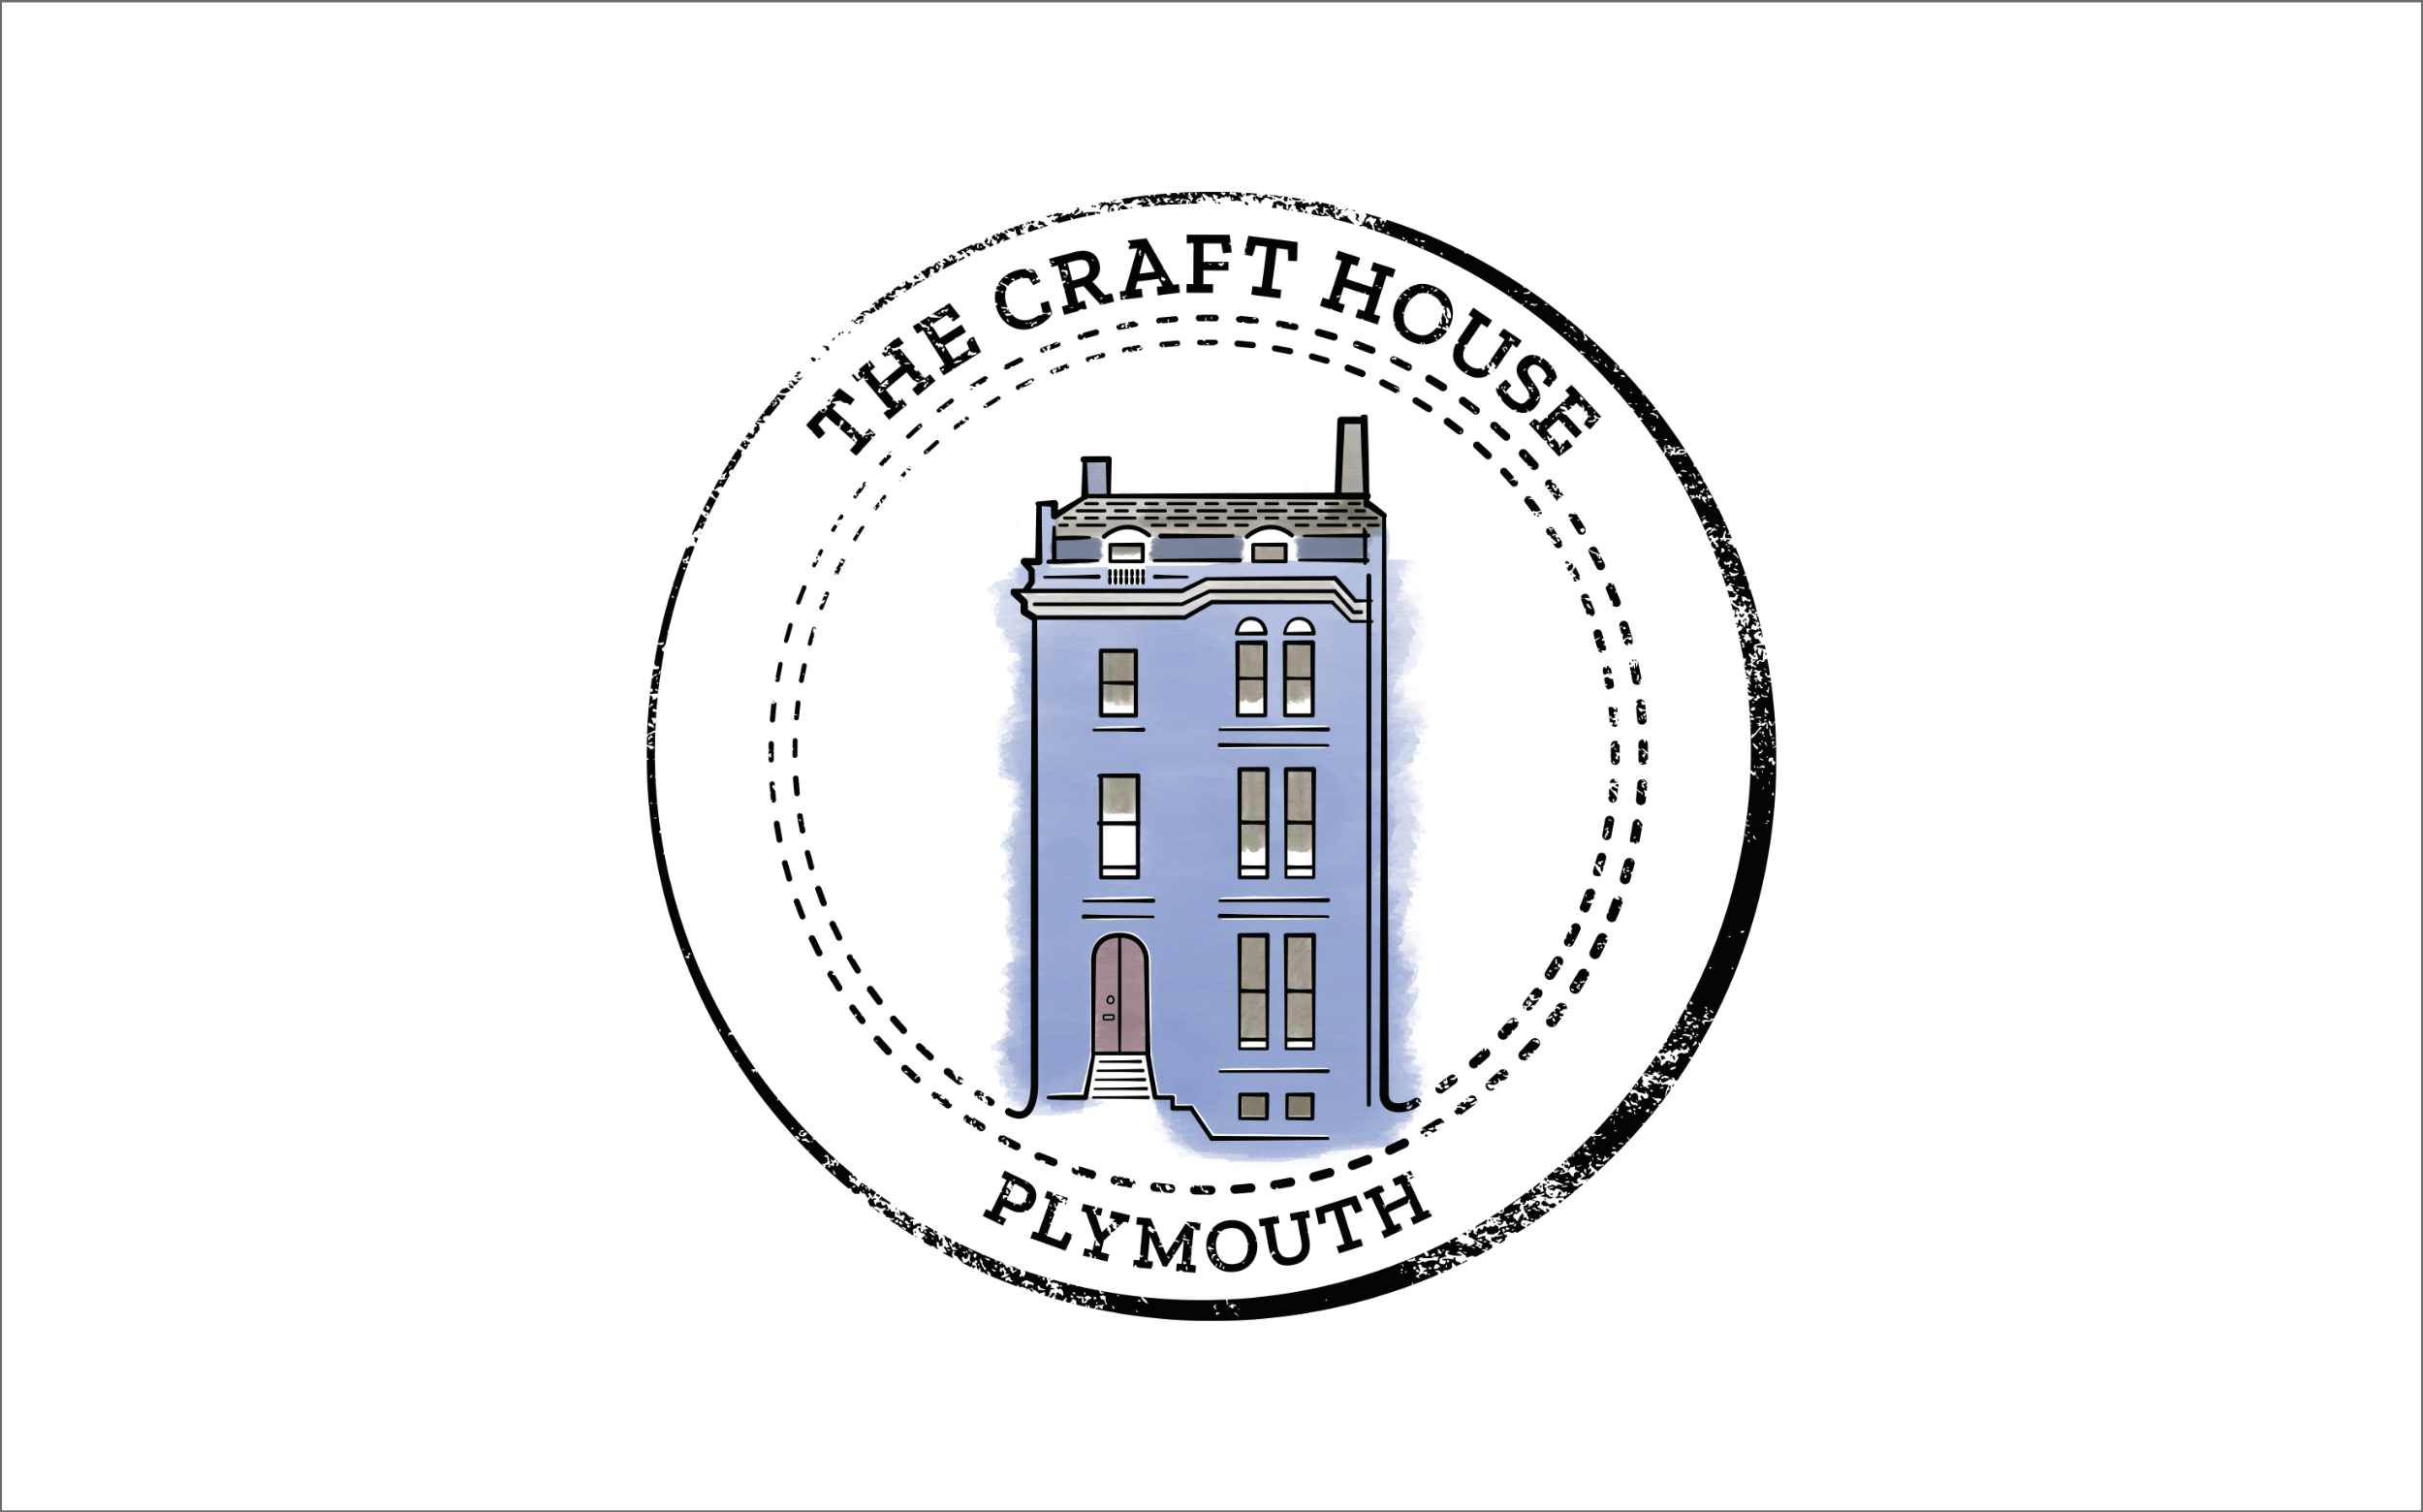 Logo Design for The Craft House Plymouth.  Made by Jon Glanville - Plymouth Graphic Designer.